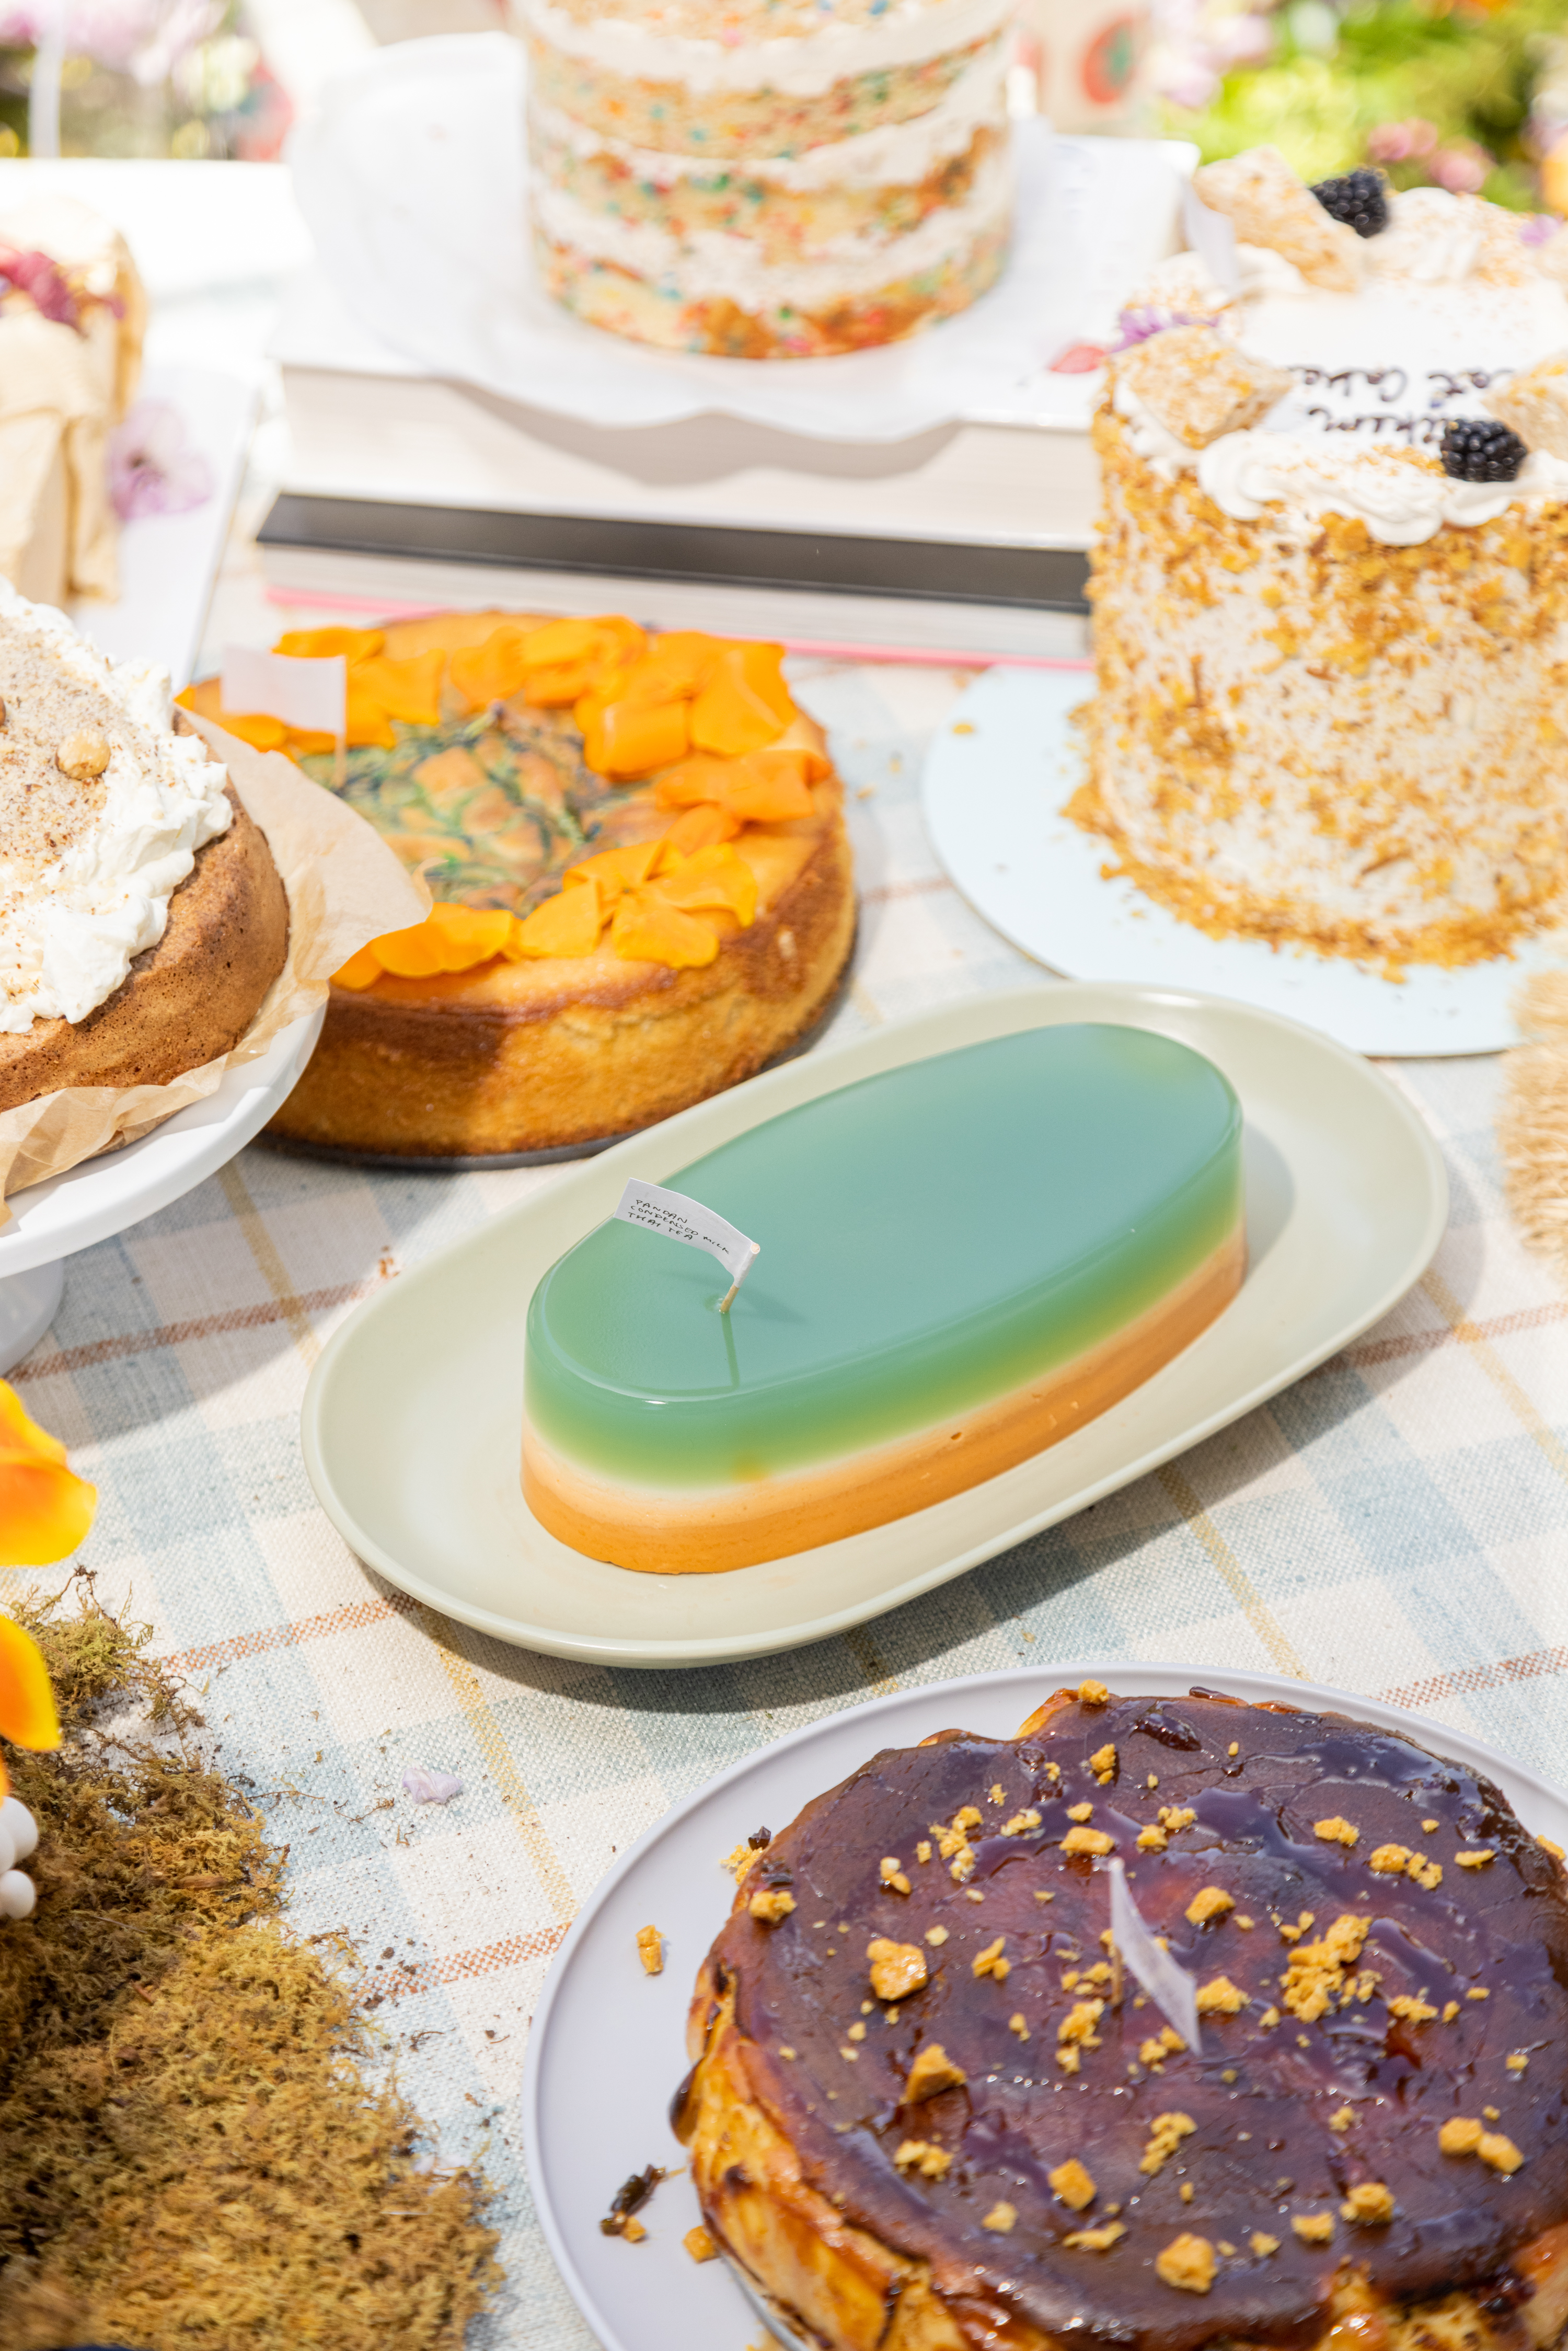 An assortment of colorful cakes on plates, one with a smooth, teal-glazed top.